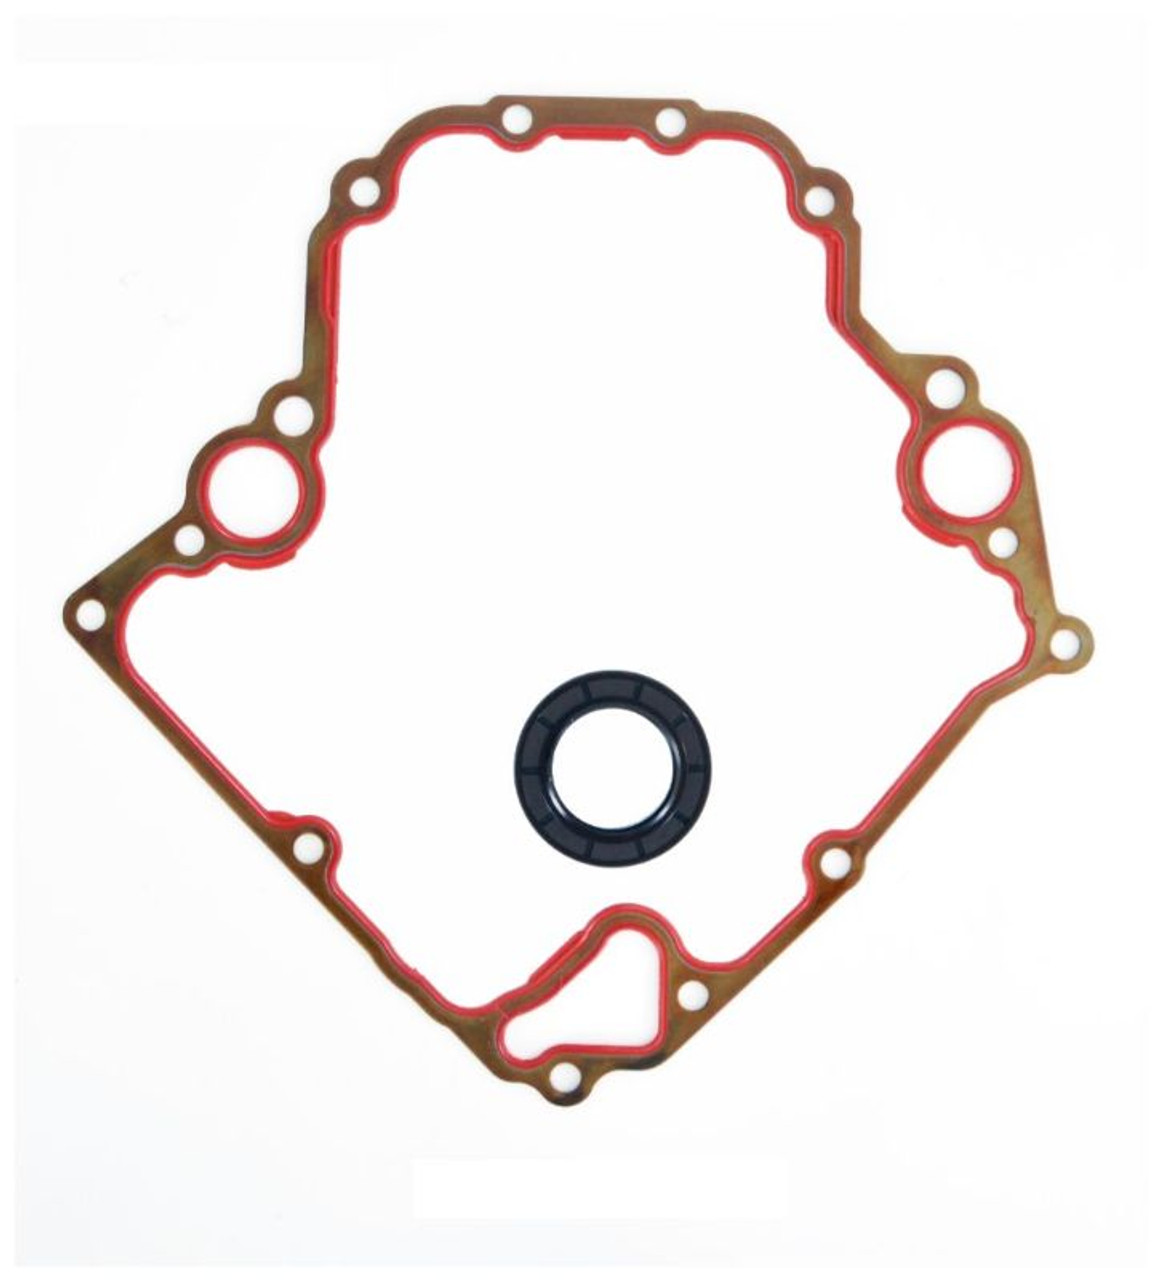 2002 Jeep Grand Cherokee 4.7L Engine Timing Cover Gasket Set TCCR287-A -12